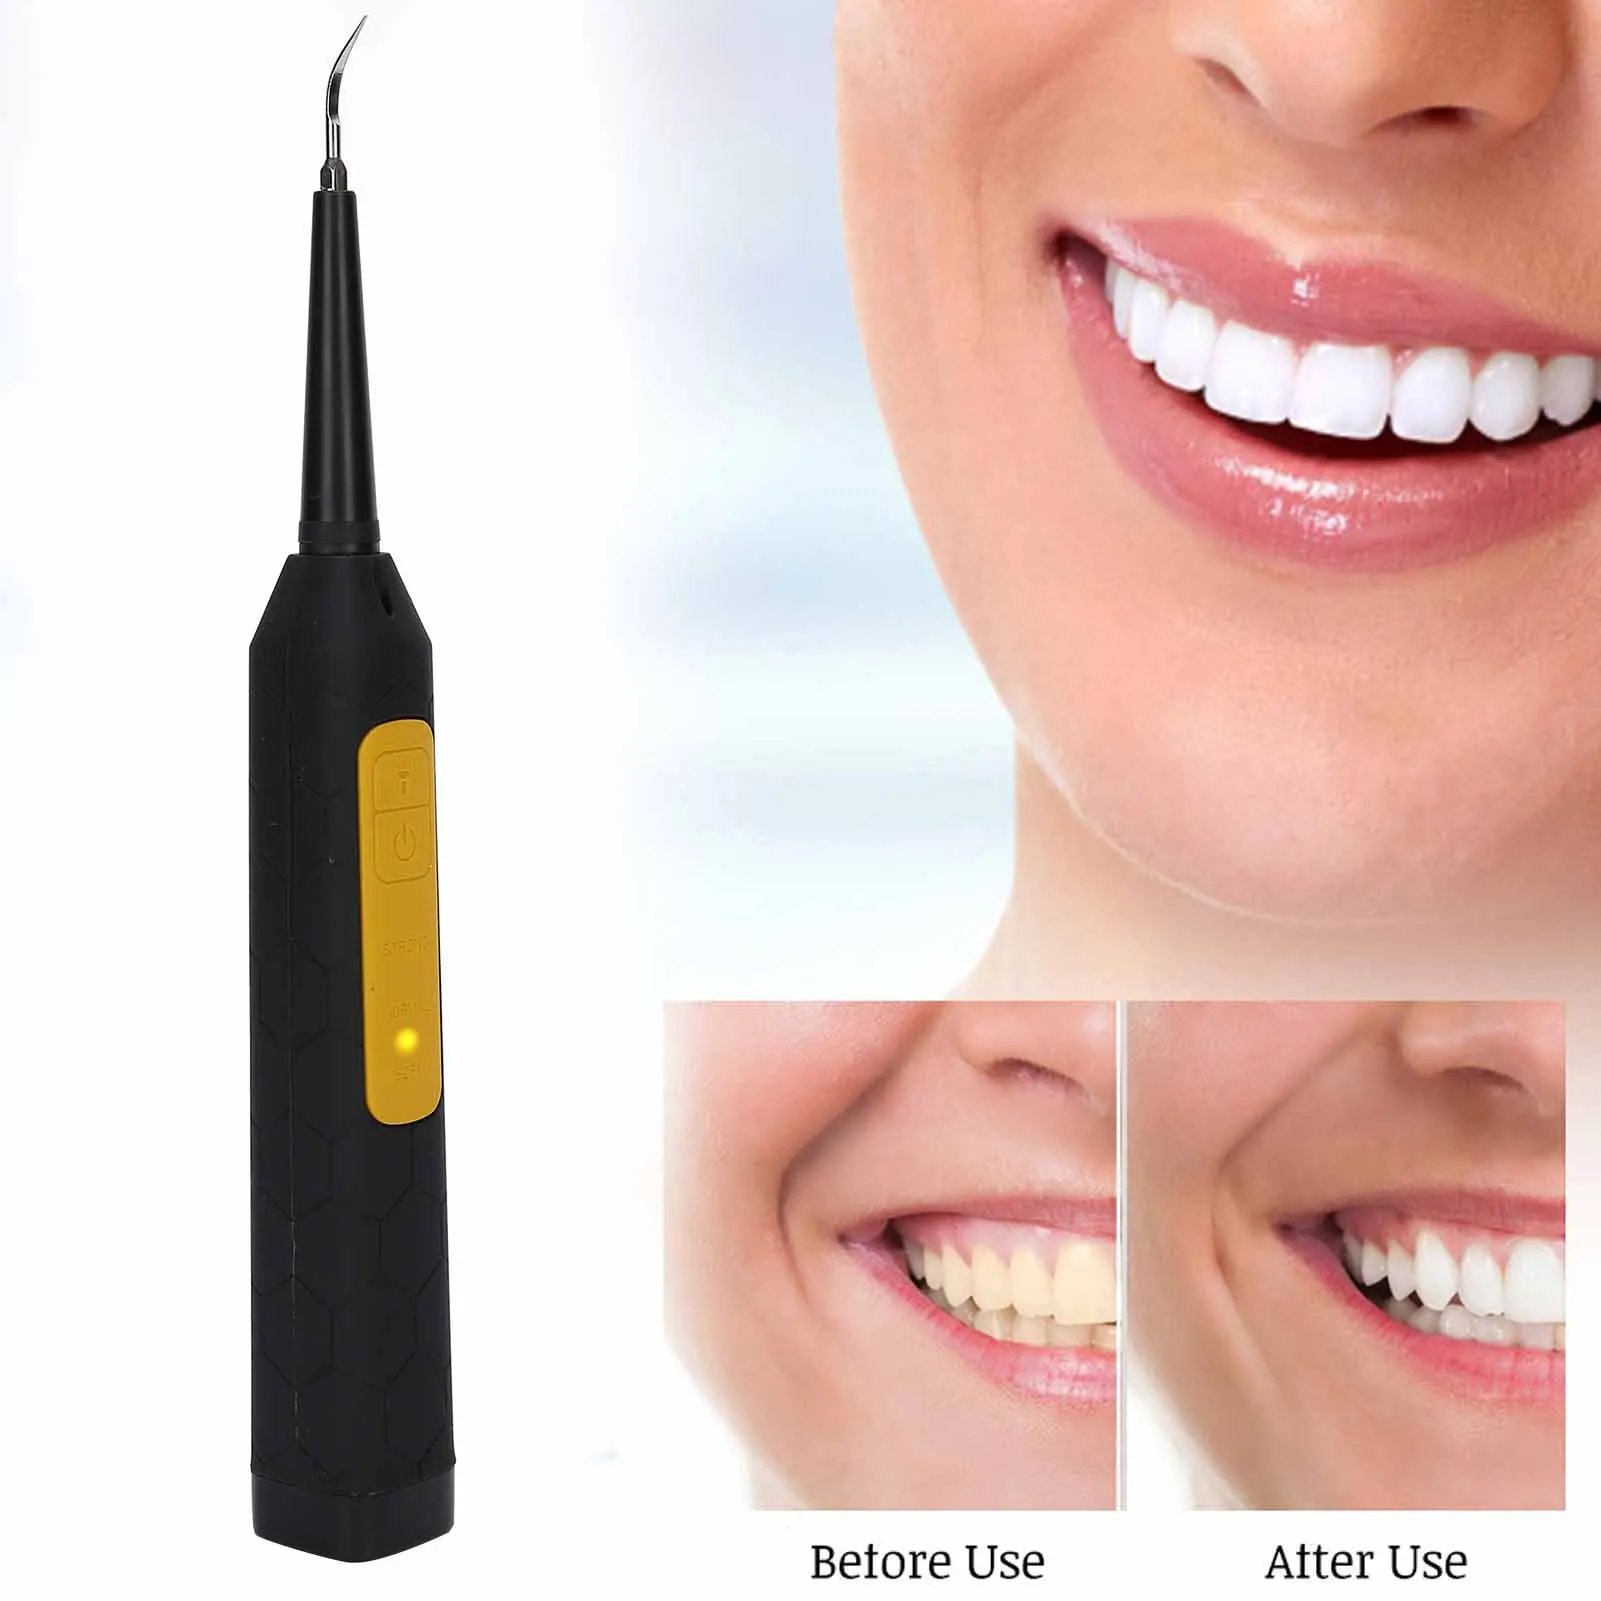 HighQuality Stainless Steel Head Tooth Cleaner Electric Calculus Remover Portable Teeth Tartar Remover Oral Care Tool USB Charg 100 pieces interdental brushes dental floss toothpick orthodontic braces brush tooth cleaning tool oral care